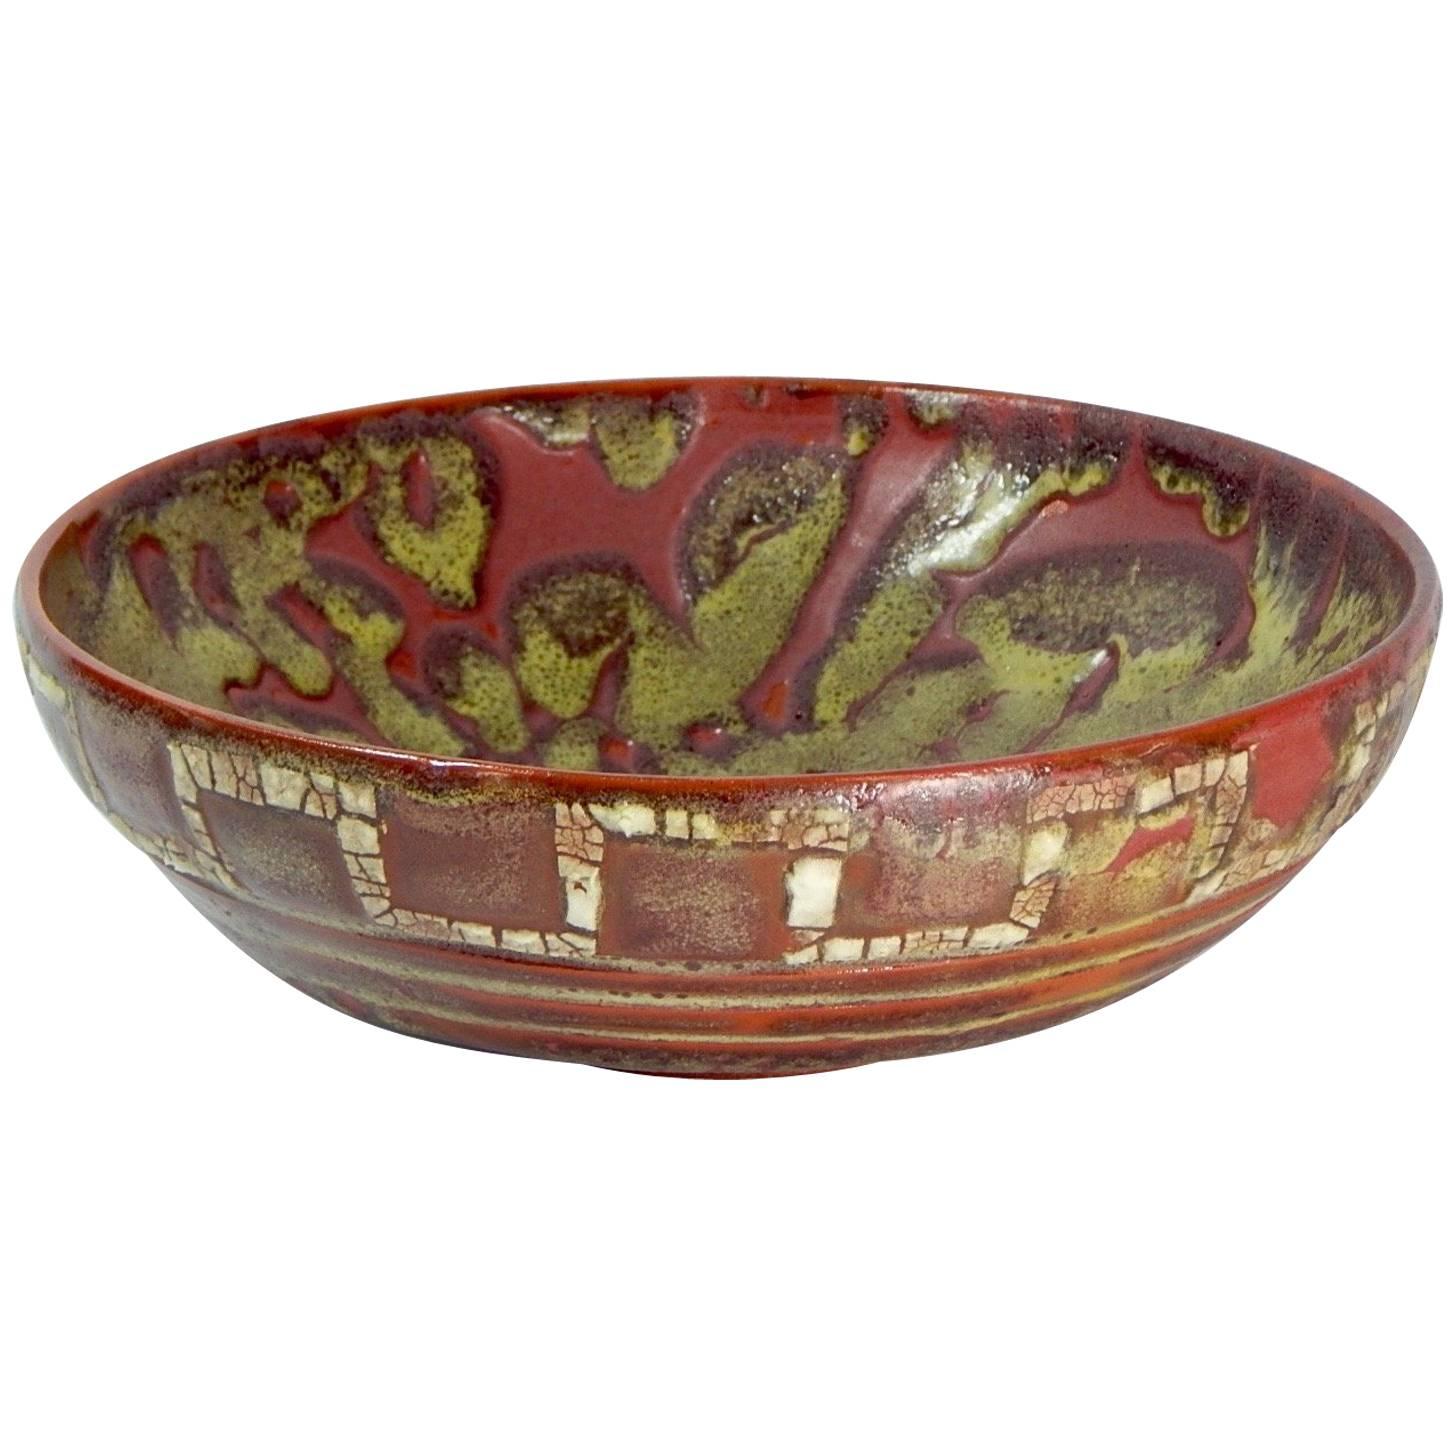 Relicware Earthenware Bowl # 88 by Andrew Wilder